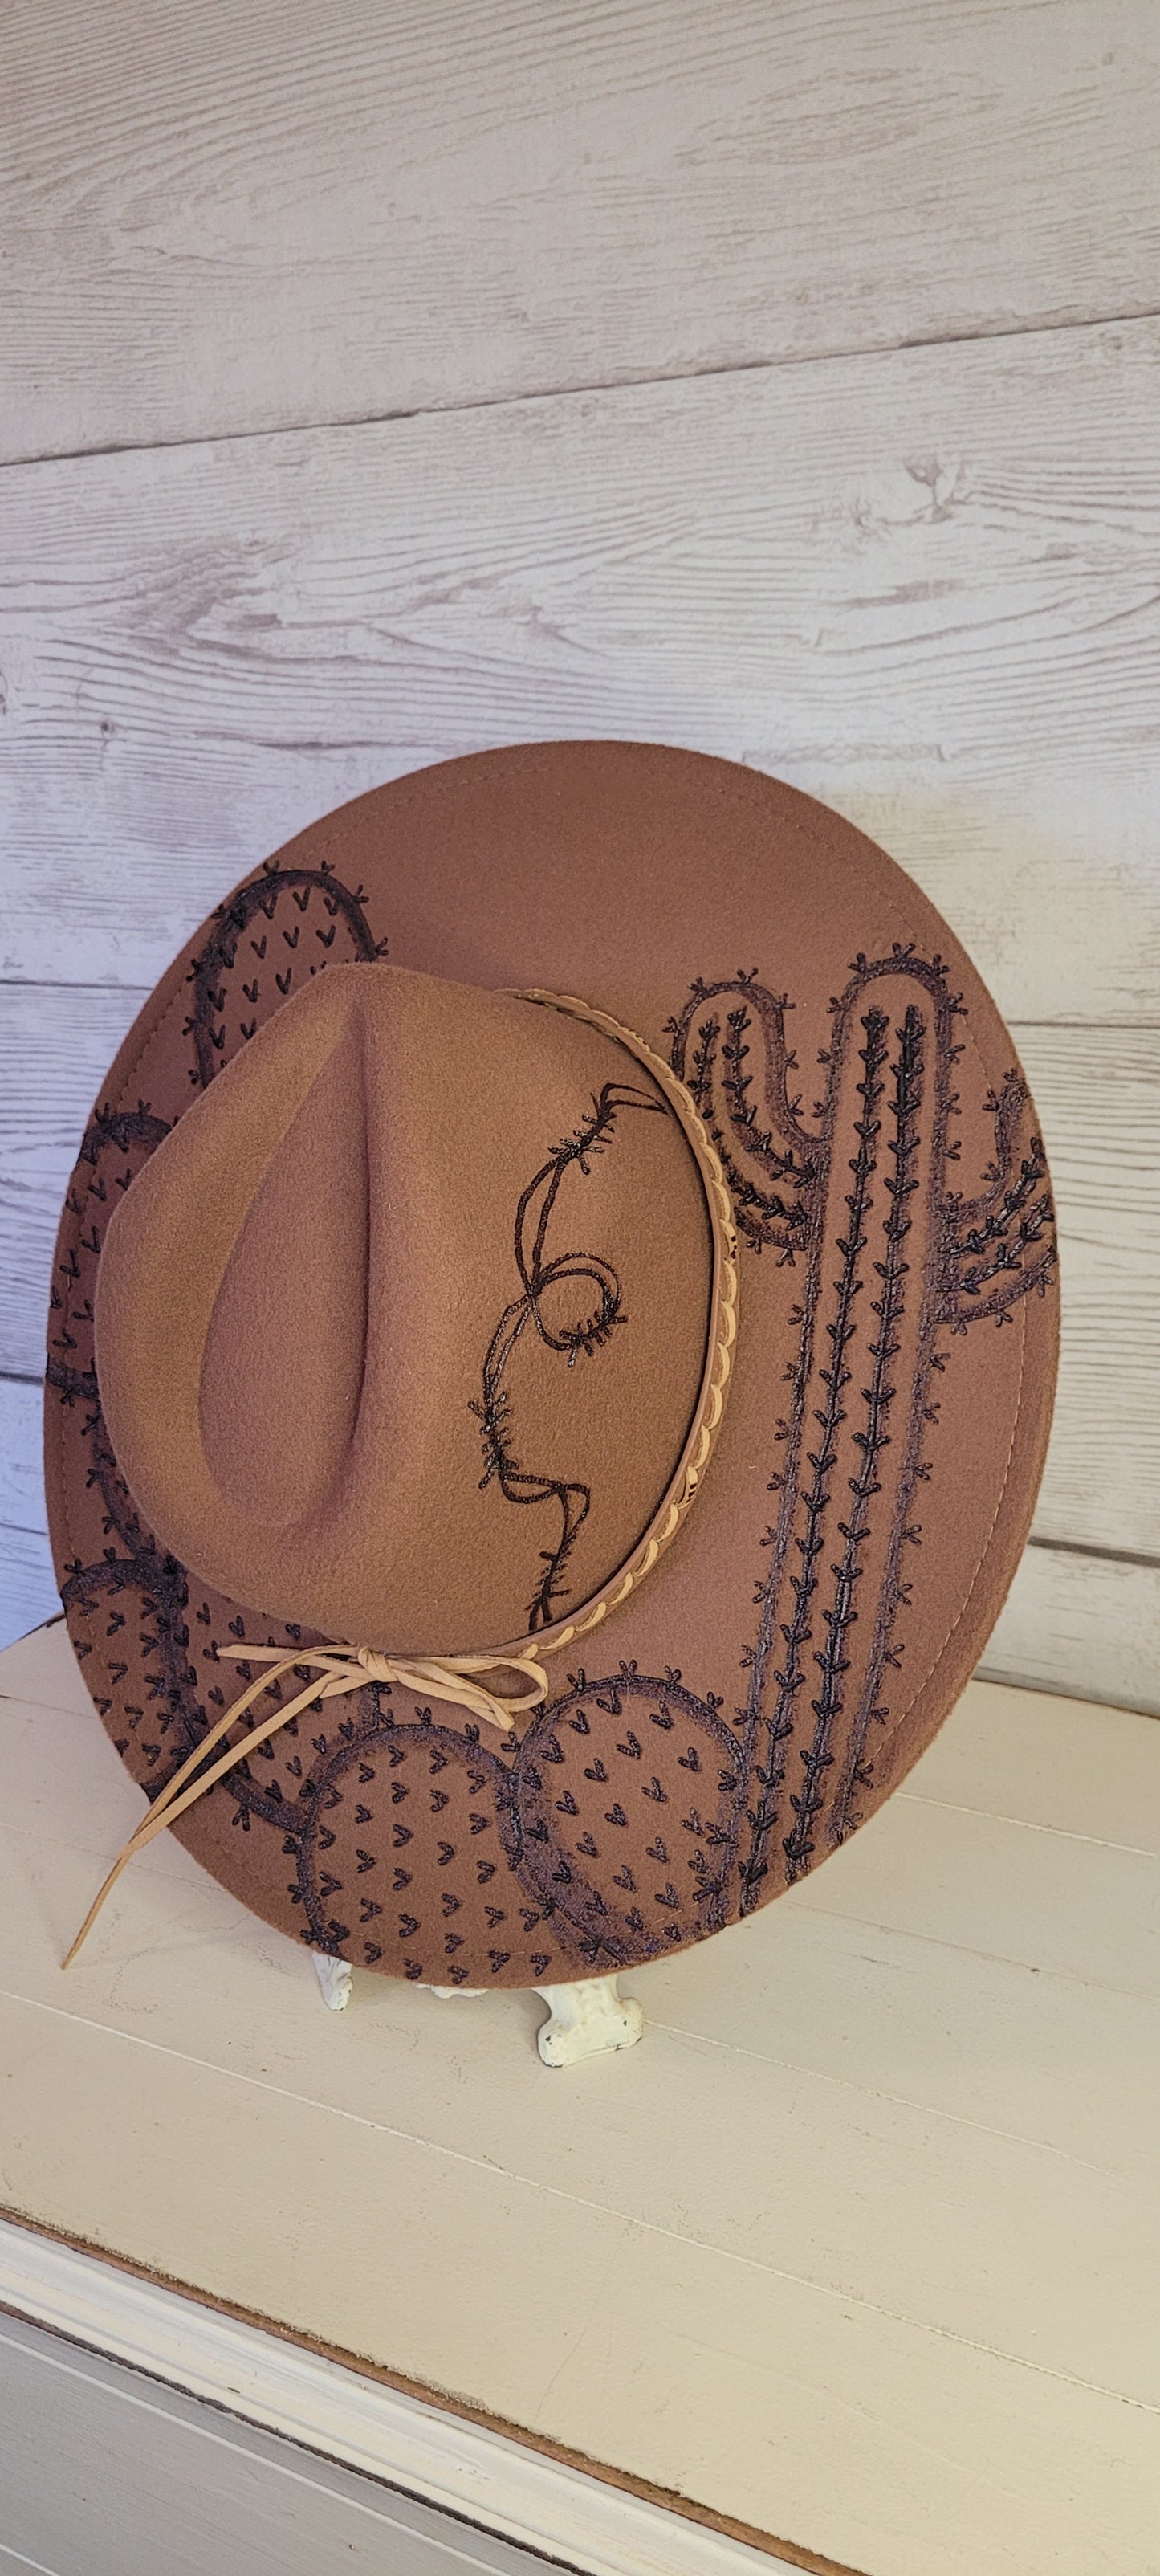 Features barbwire, cactus & saguaro Natural lace ribbon & leather band Felt hat Flat brim 100% polyester Ribbon drawstring for hat size adjustment Head Circumference: 24" Crown Height: 5" Brim Length: 15.75" Brim Width: 14.5" Branded & numbered inside crown Custom engraved by Kayla